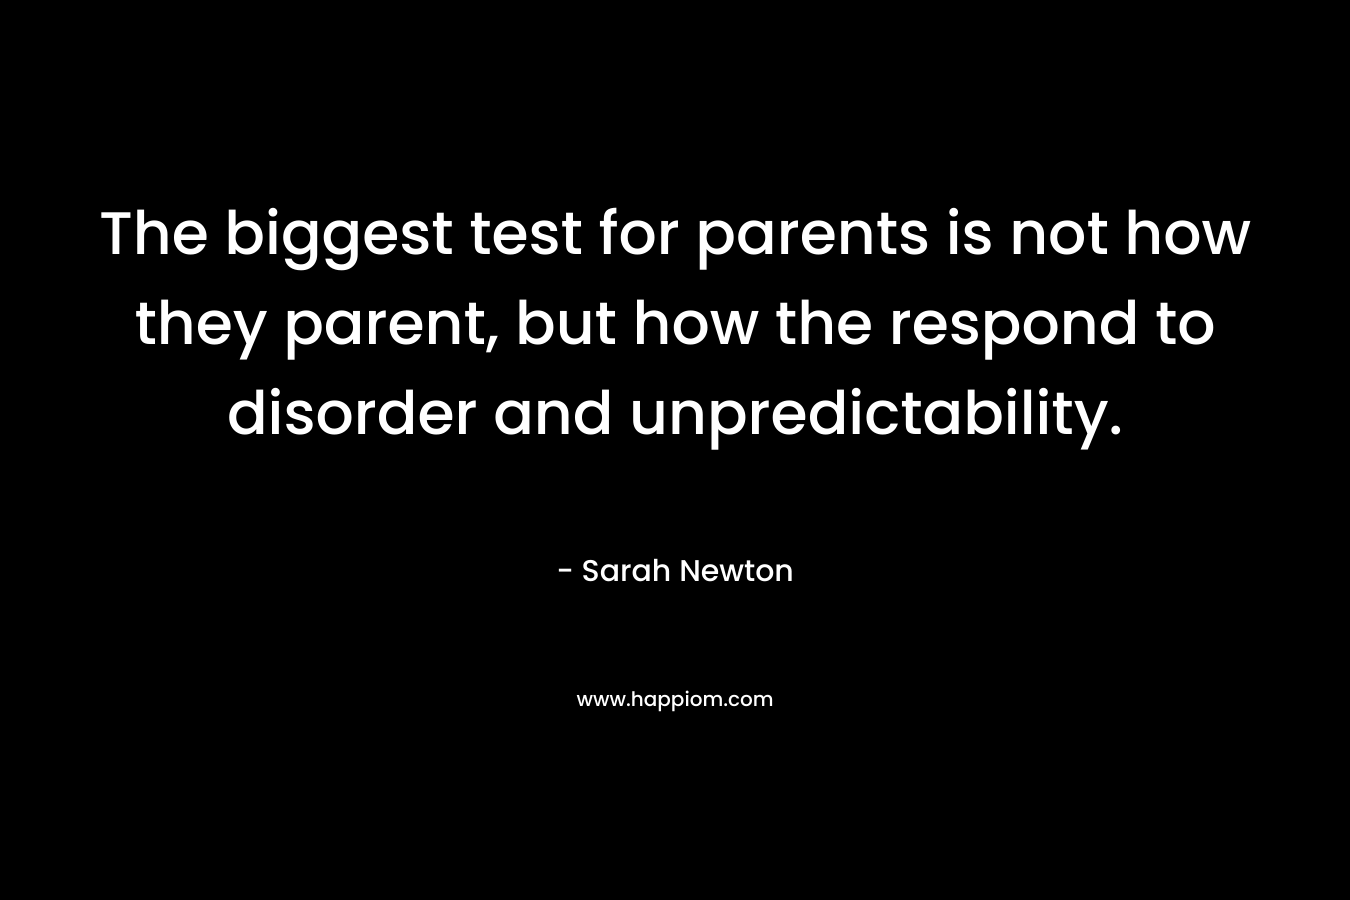 The biggest test for parents is not how they parent, but how the respond to disorder and unpredictability.